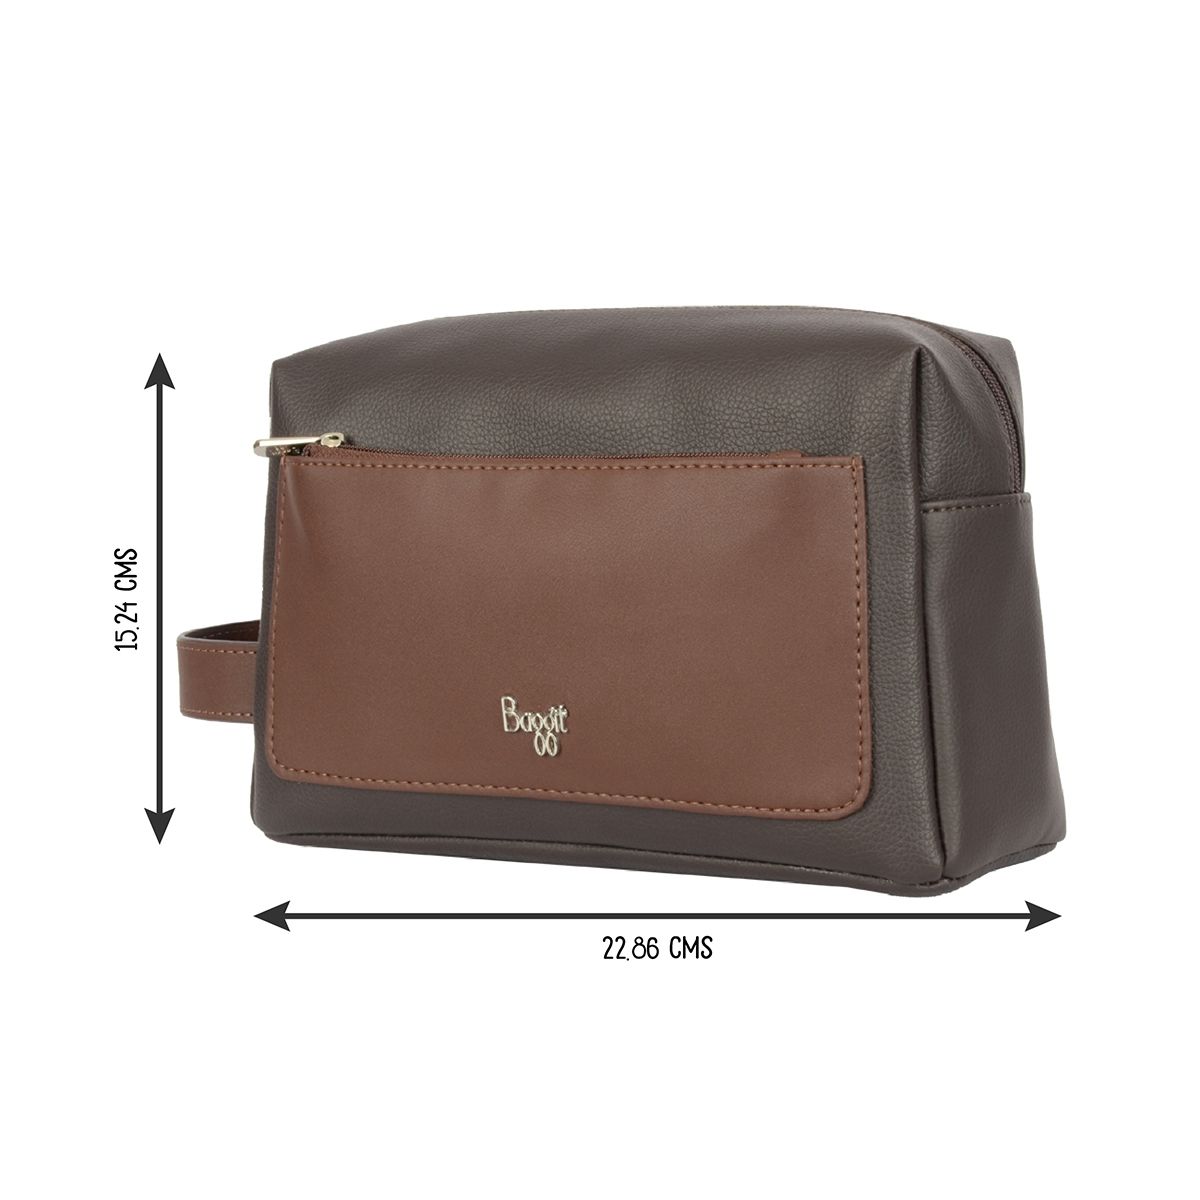 Buy Baggit Jack Extra Small Brown Travel Pouch Online